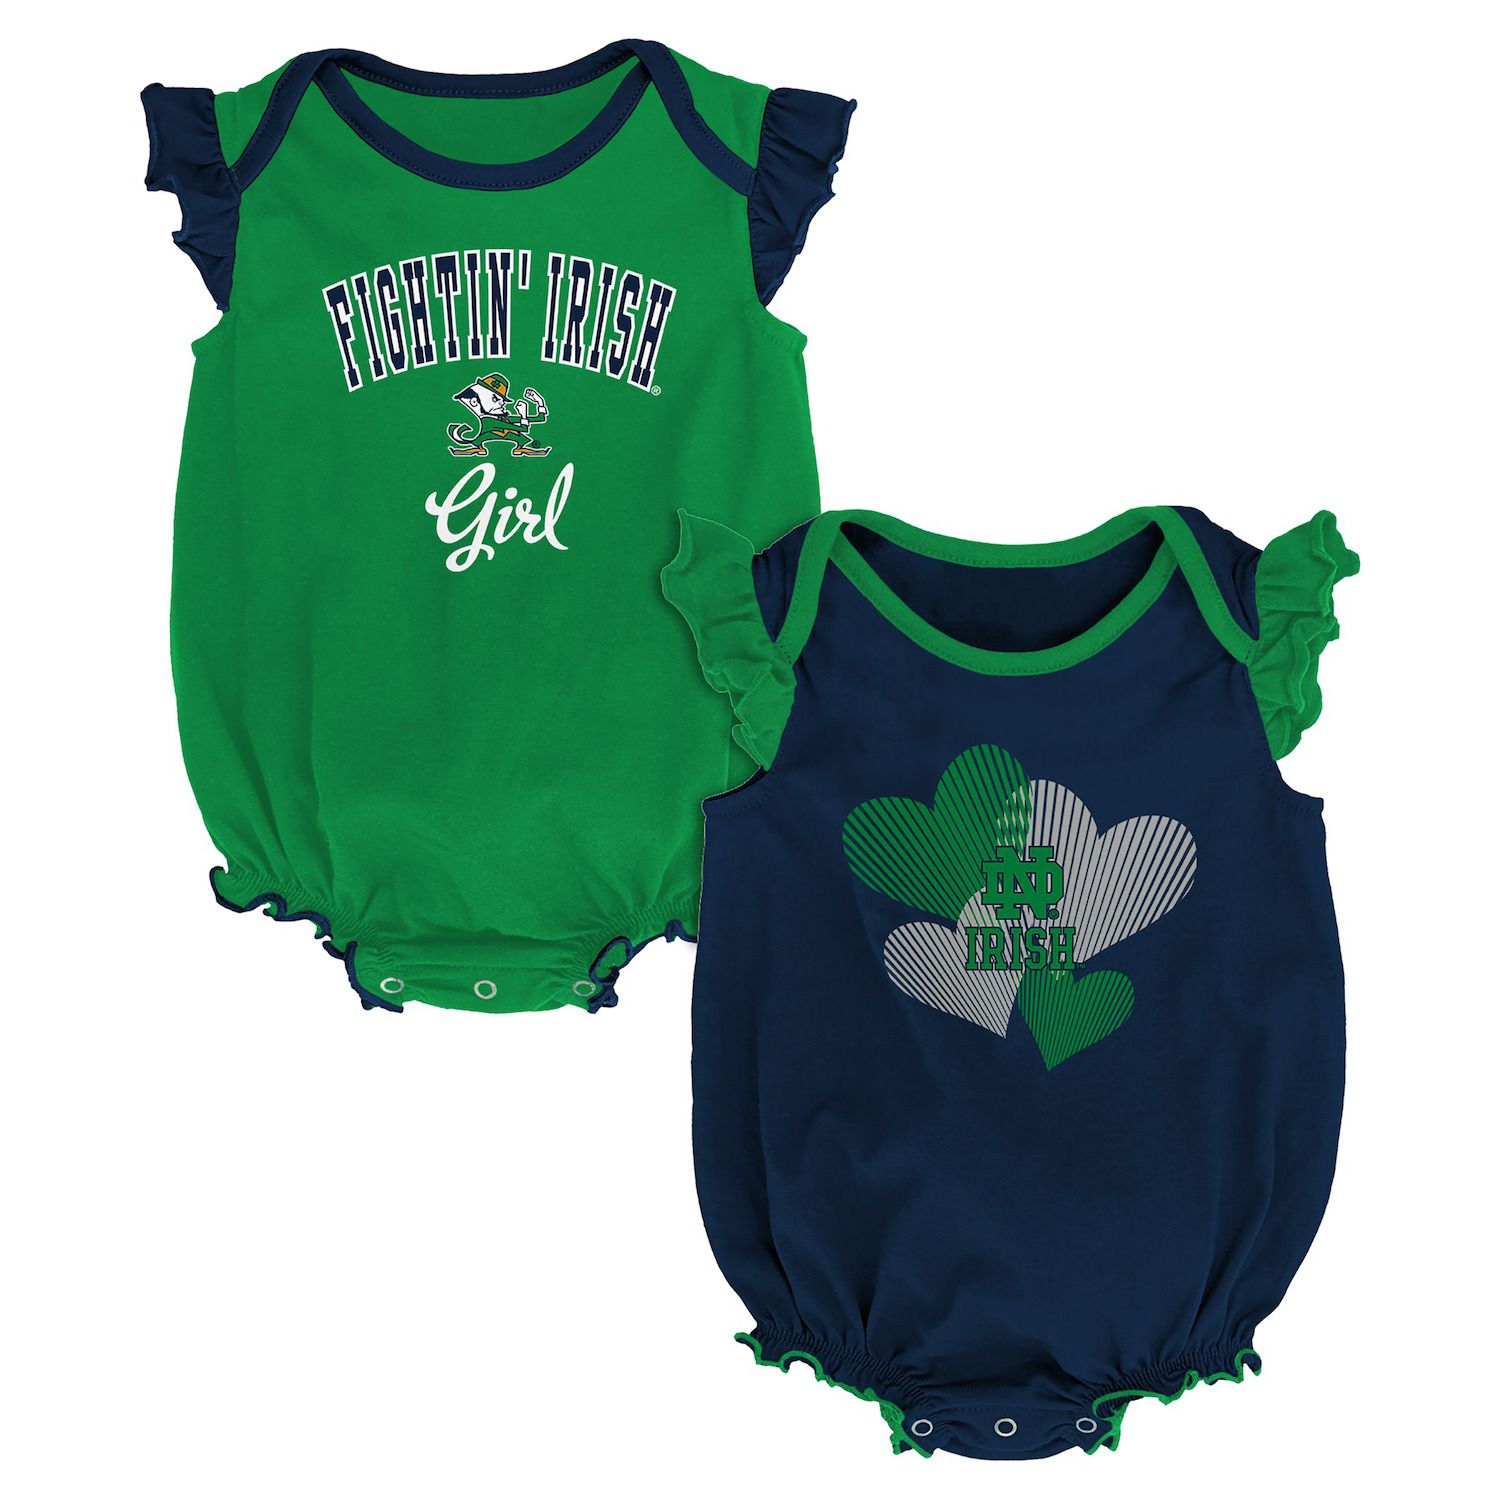 notre dame baby jersey